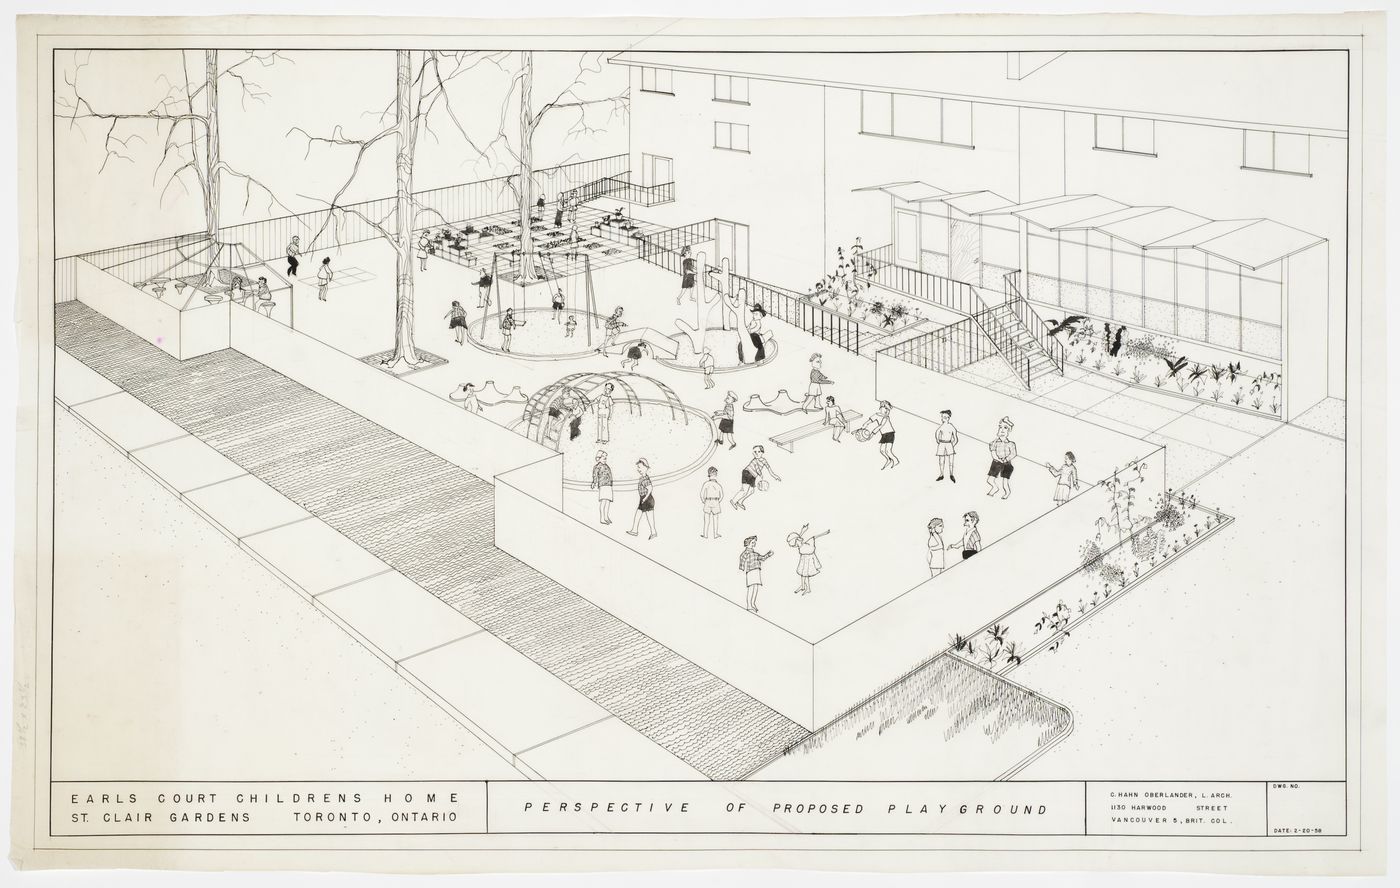 Earl's Court Children's Home, St. Clair Gardens, Toronto, Ontario: Perspective of proposed playground